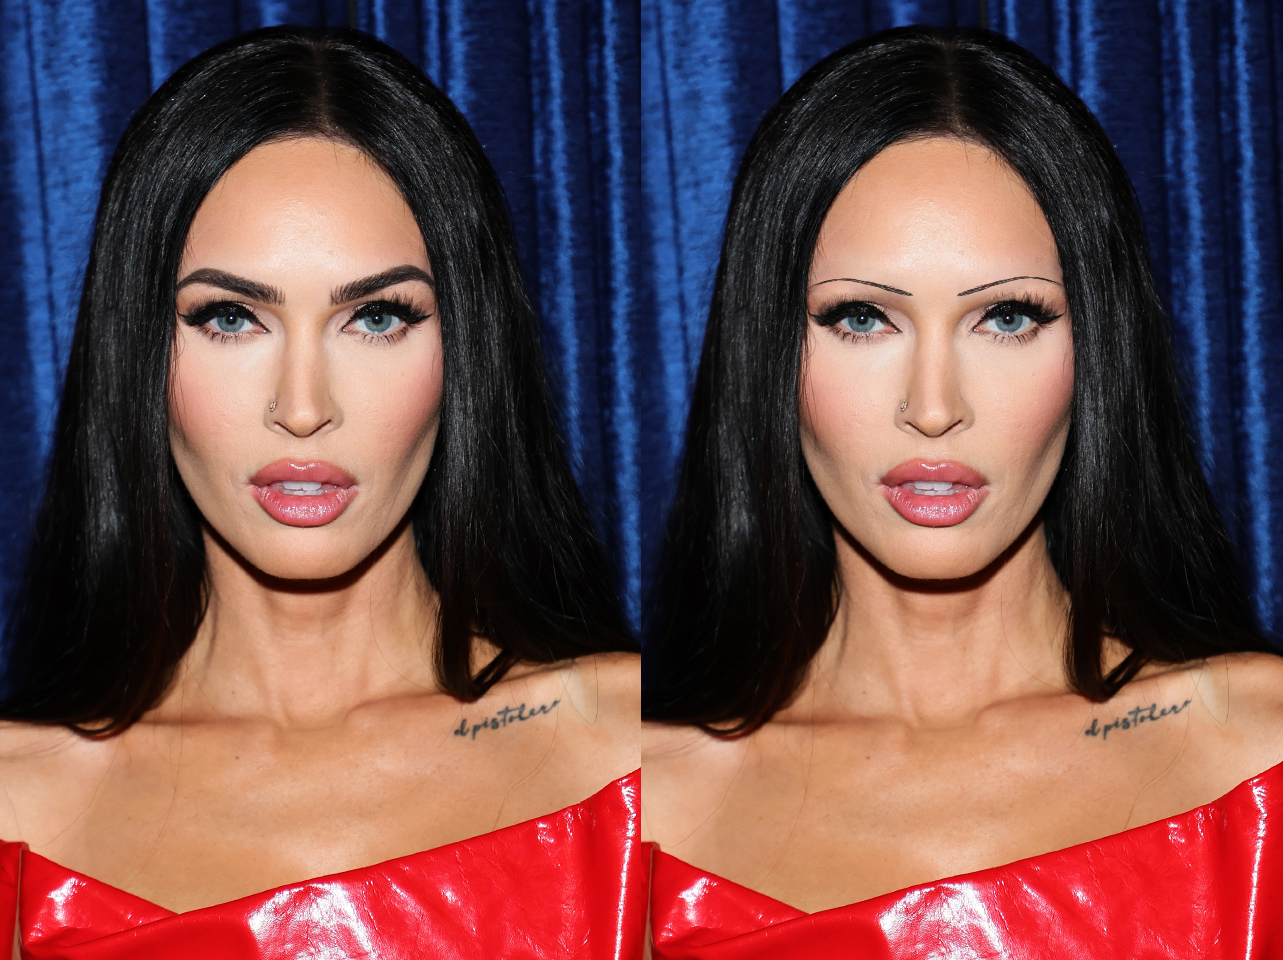 Megan Fox signature brows from 2022 vs a digitally edited thin-brow look | Source: Getty Images